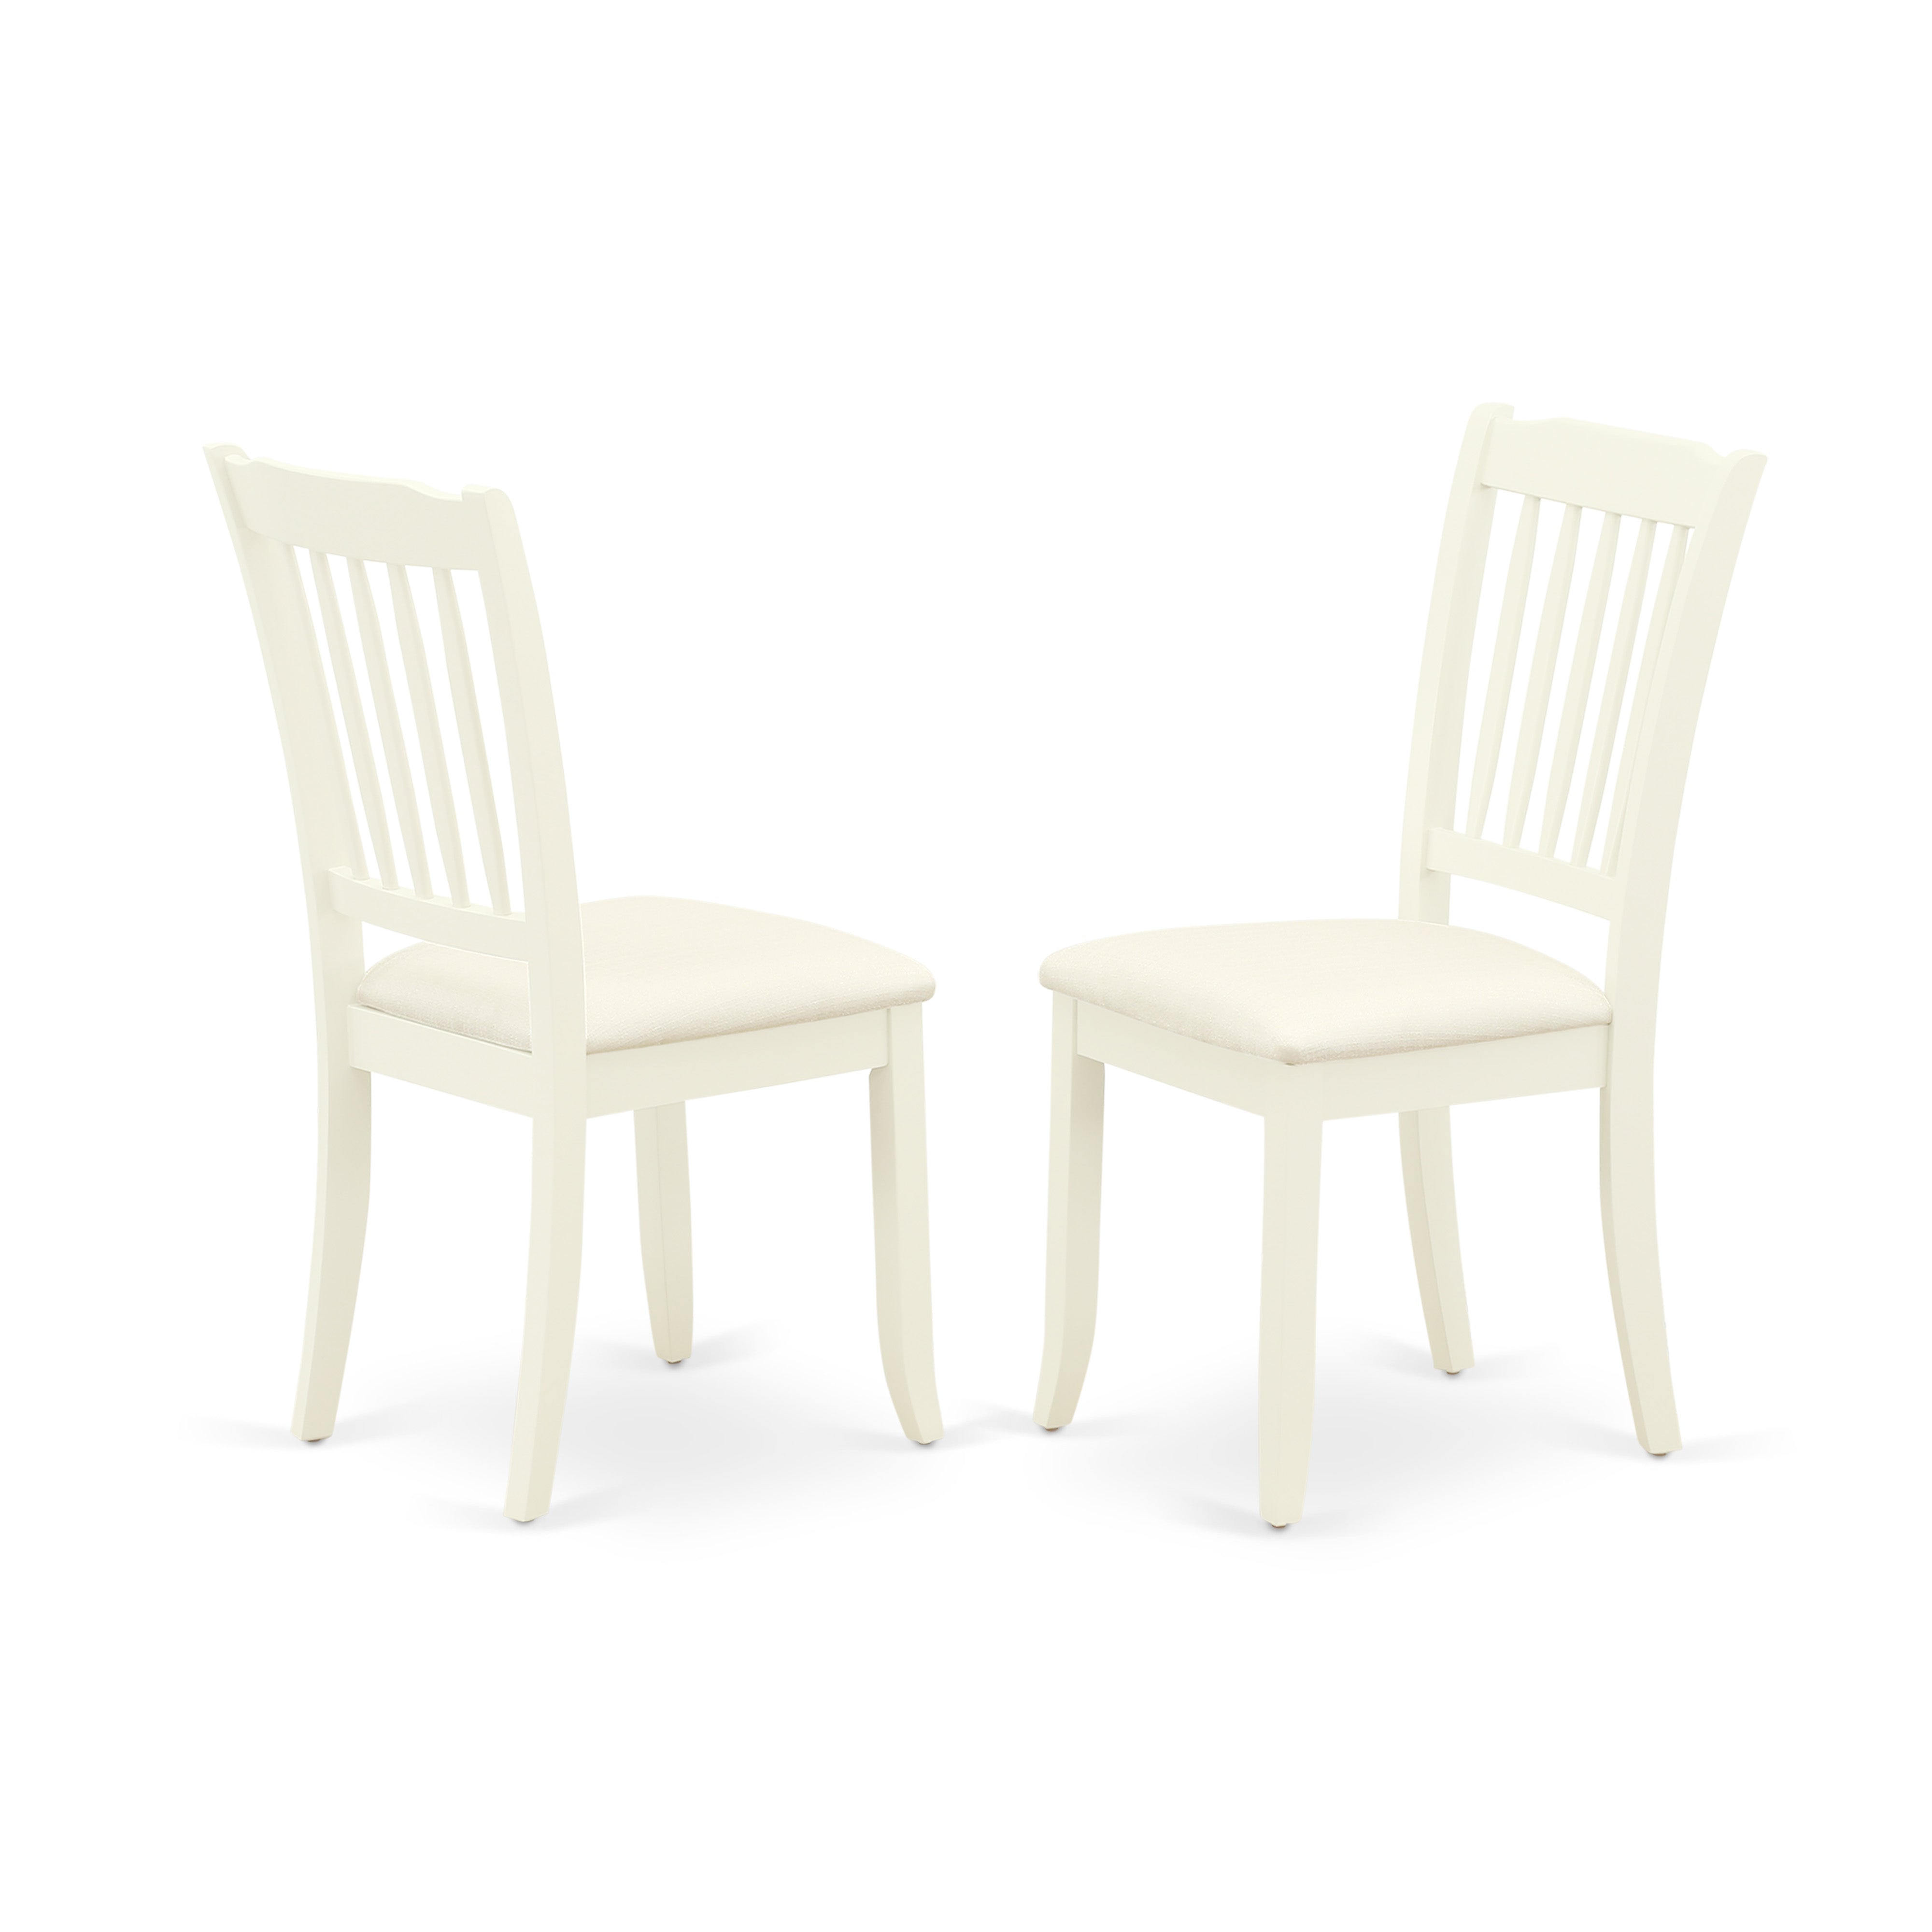 DAC-LWH-C Danbury vertical slatted back chairs with Linen Fabric Upholstered Seat in Linen white finish